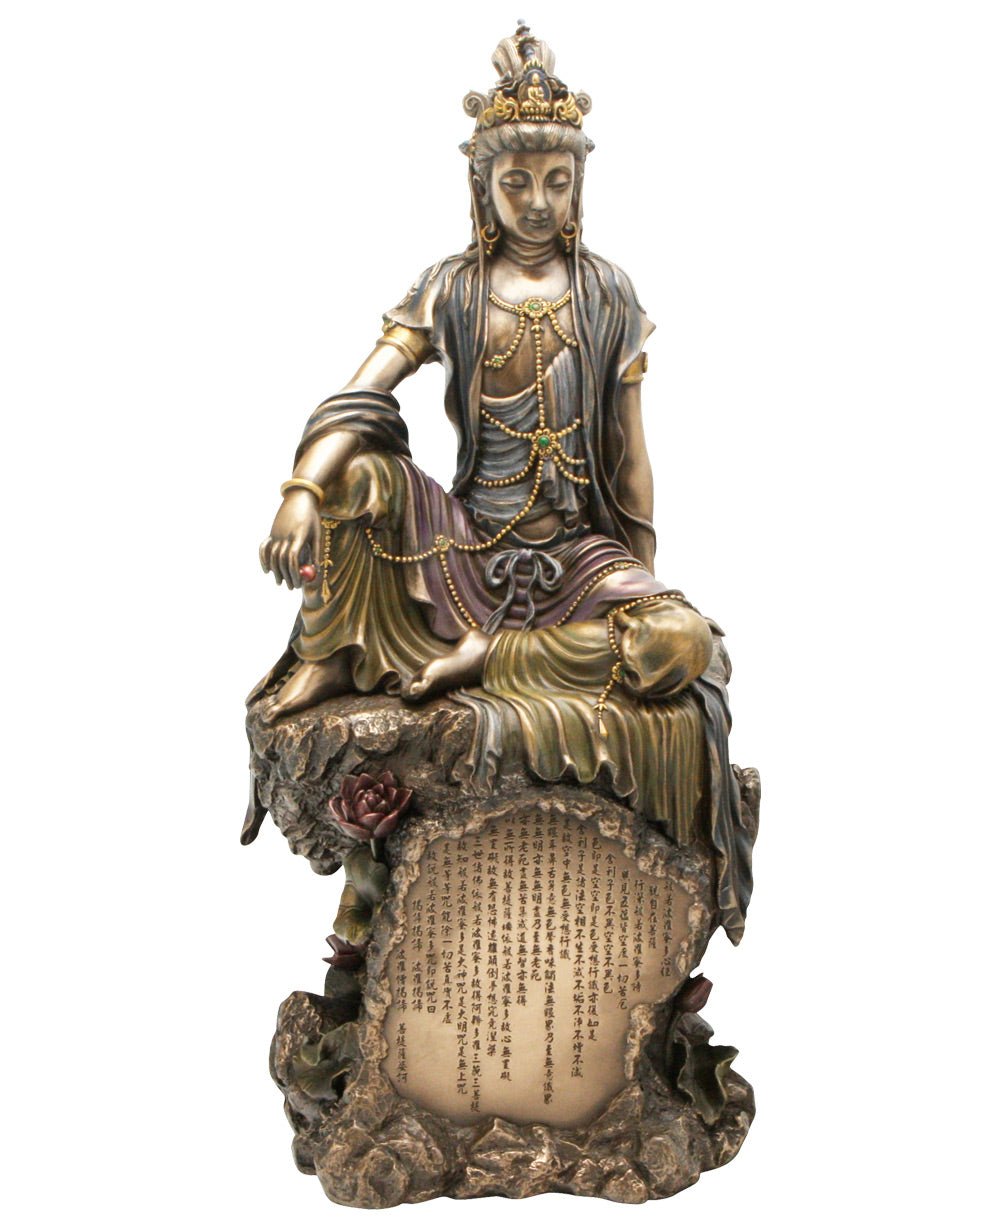 Cast Bronze Water and Moon 16 Inches High Kuan Yin Statue -